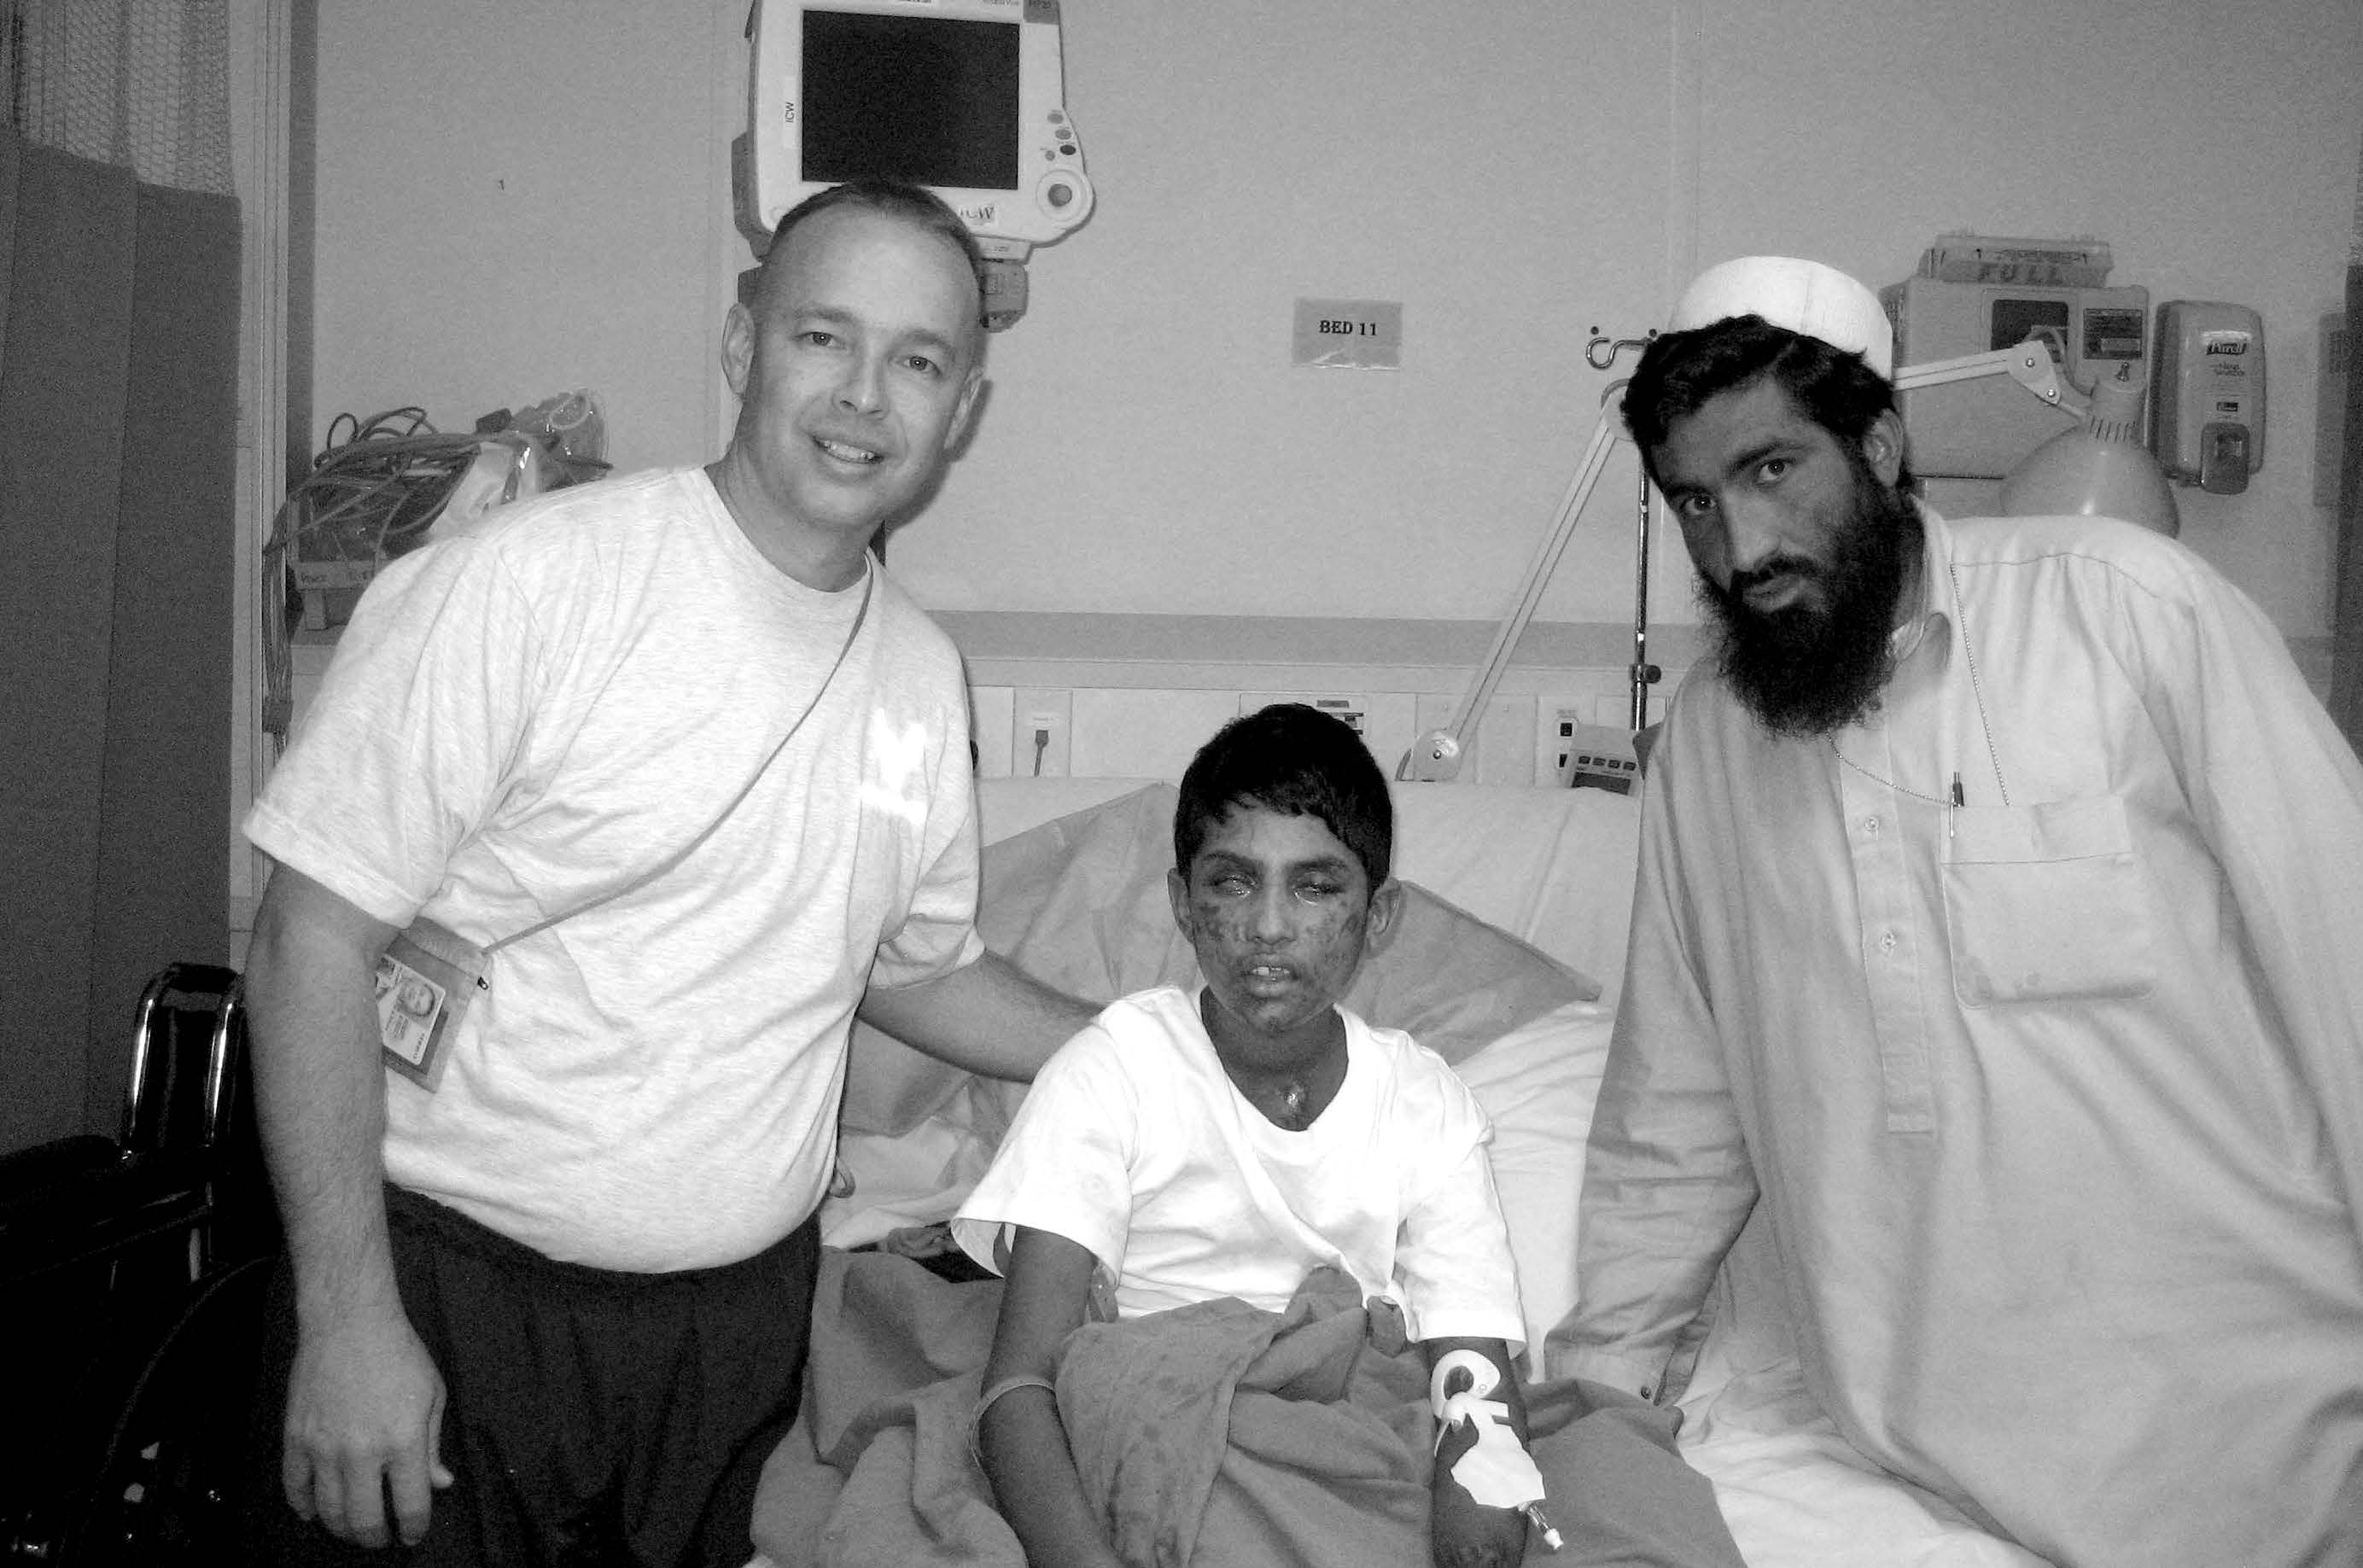 Dr. Blaine Tuft (left) at Hamed Hilal’s bedside with Hamed’s uncle while he continued to receive care at Craig Joint Theater Hospital. Courtesy of Blaine Tuft.